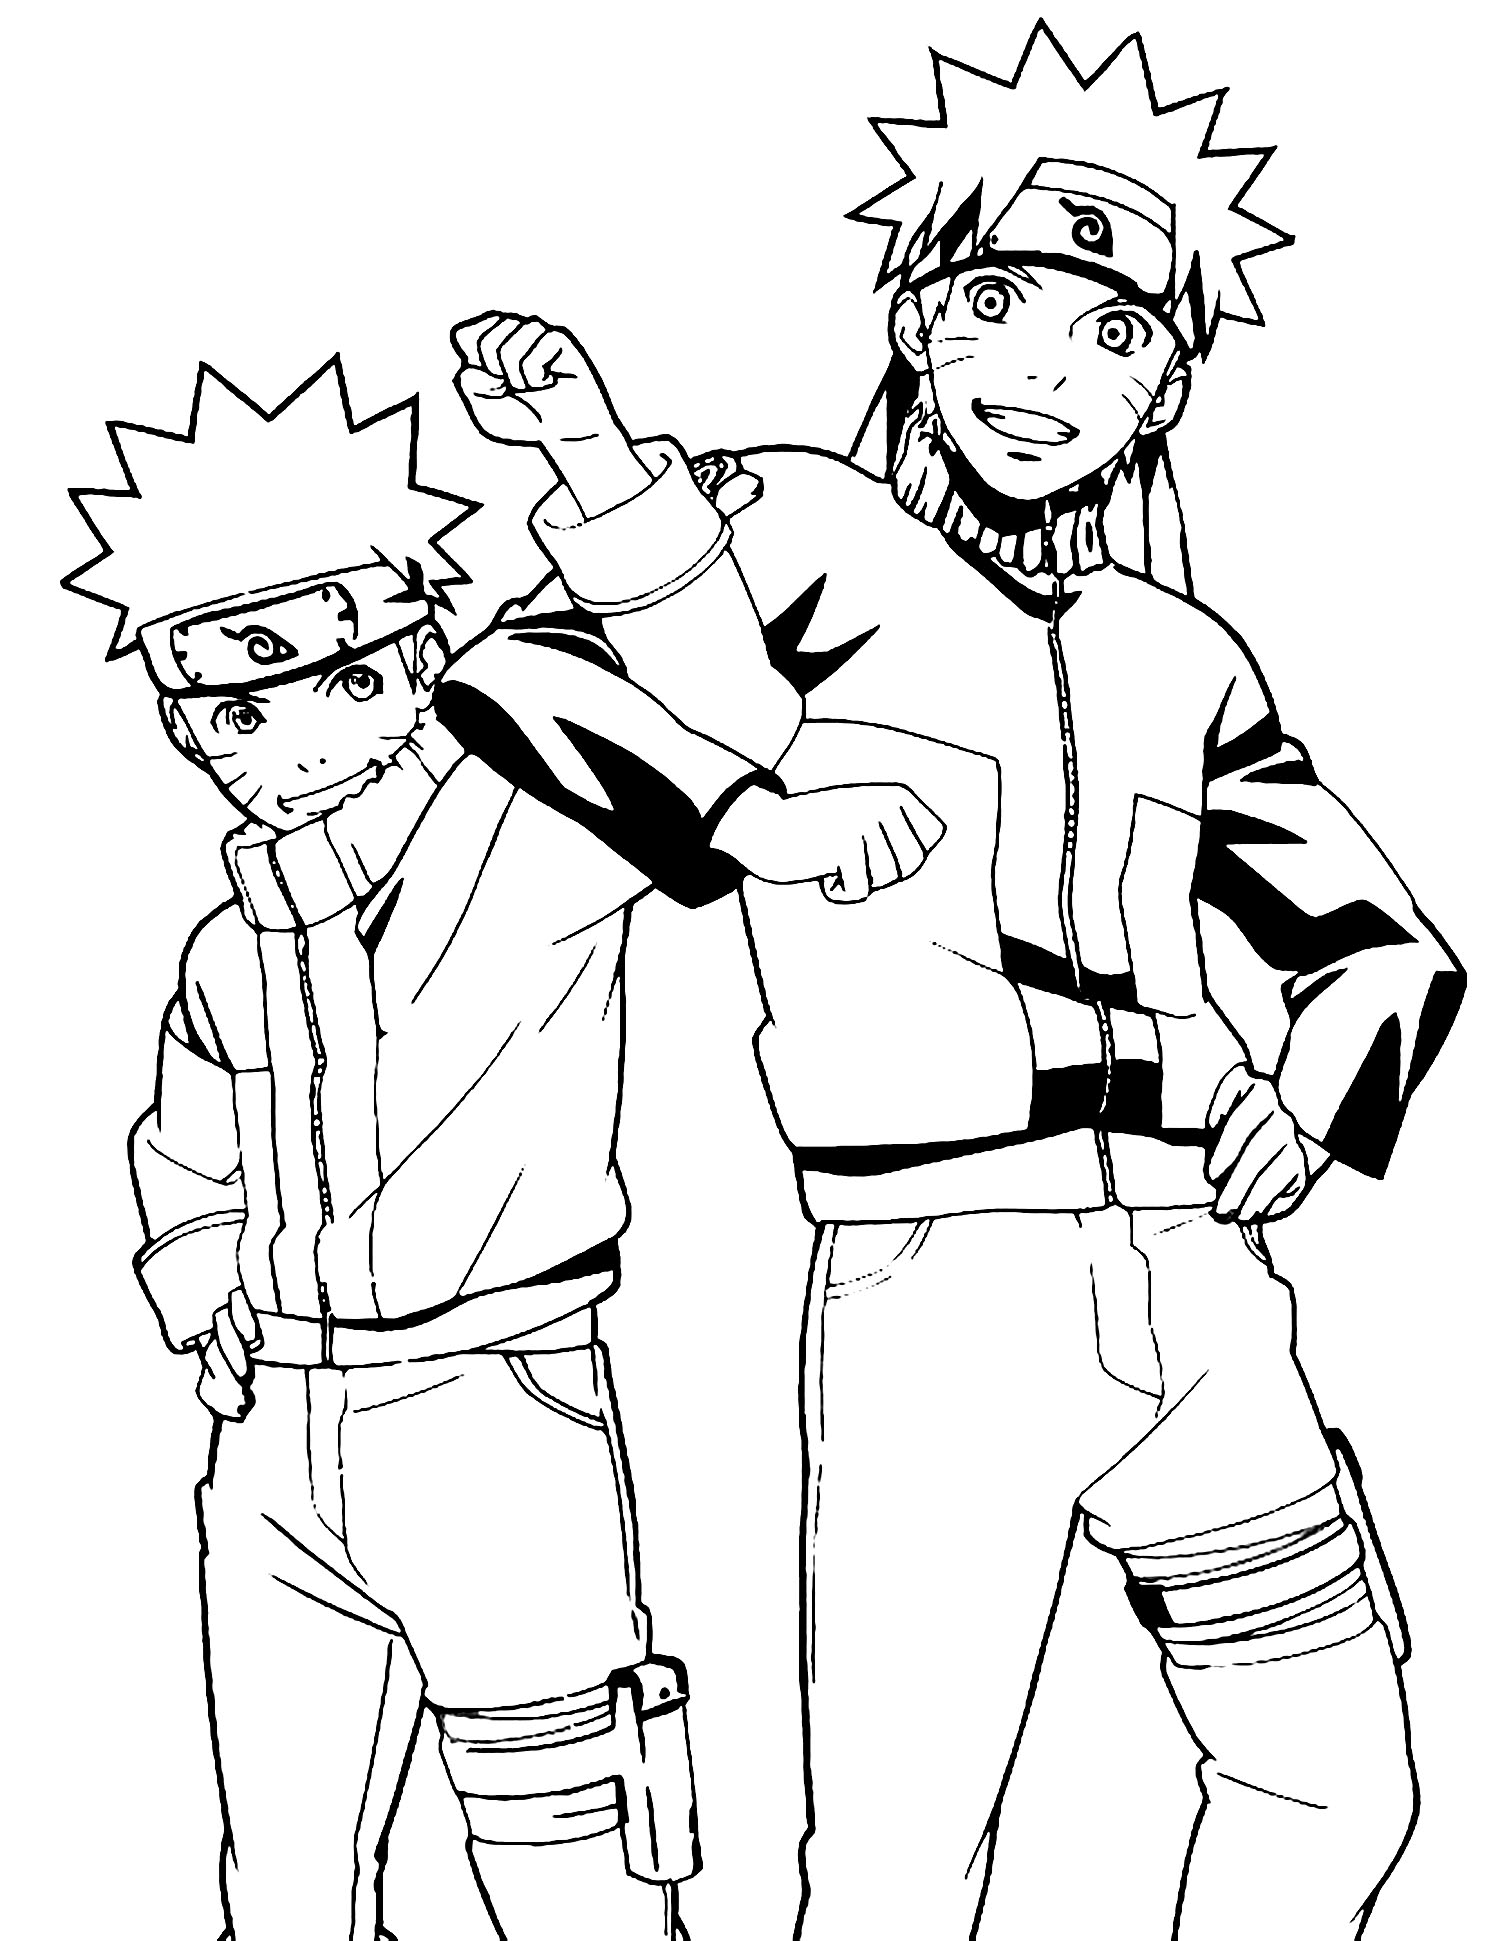 Download Naruto Coloring Pages